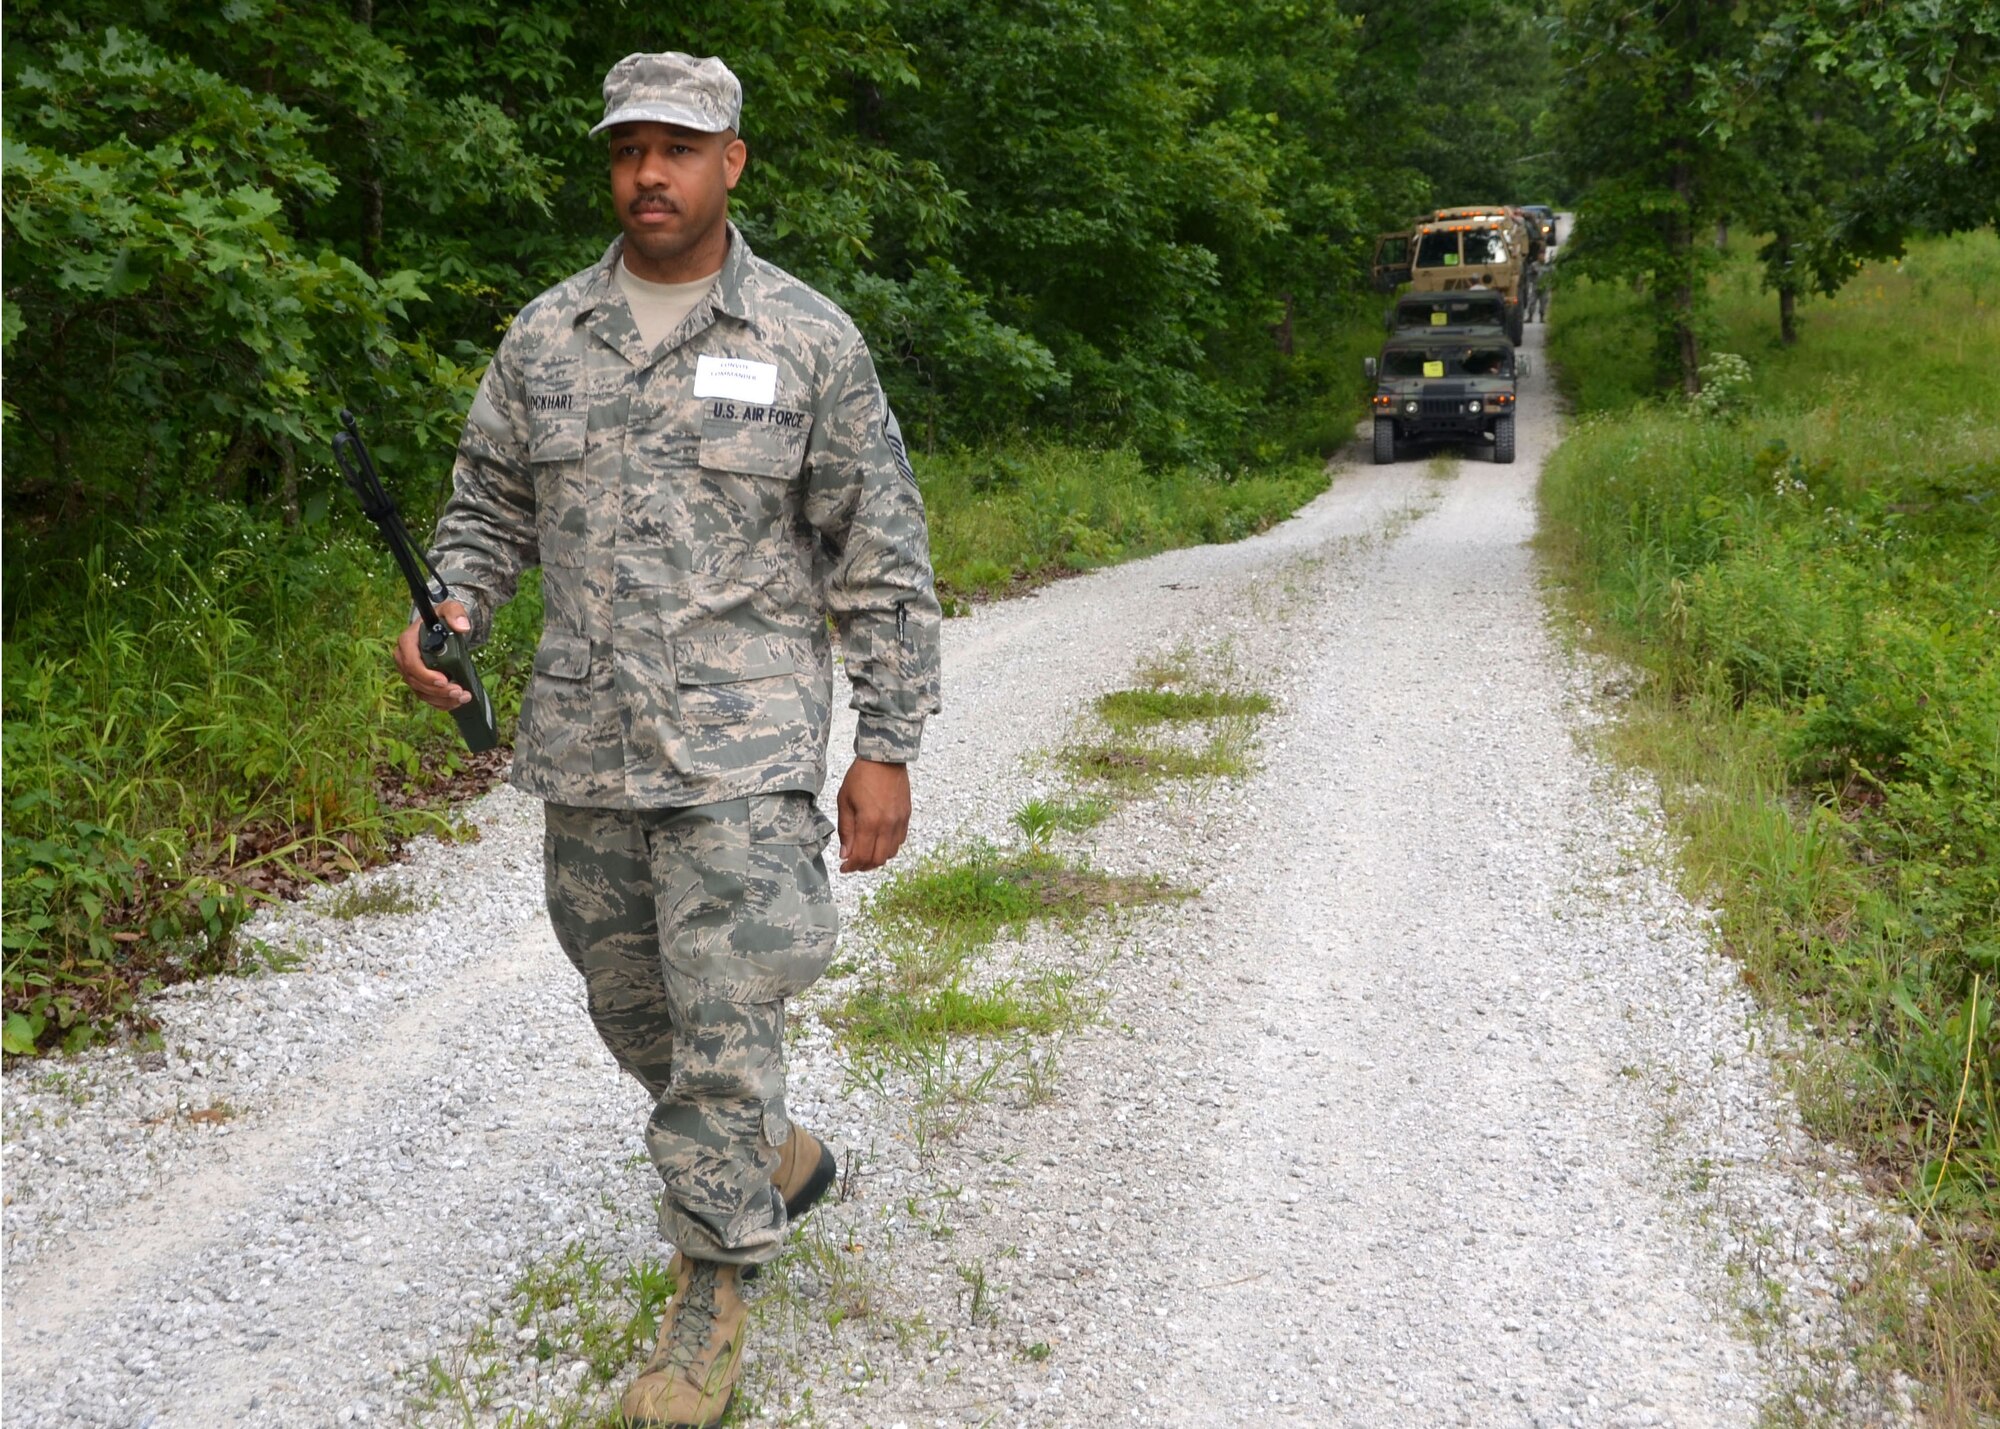 Master Sgt. Ervin Lockhart, a radio frequency technician with the 239th Combat Communications Squadron, directs his team as they move simulated barriers out of their path.  Lockhart served as the convoy and incident commander during a mass casualty exercise at Camp Clark, Missouri, June 4, 2015.  